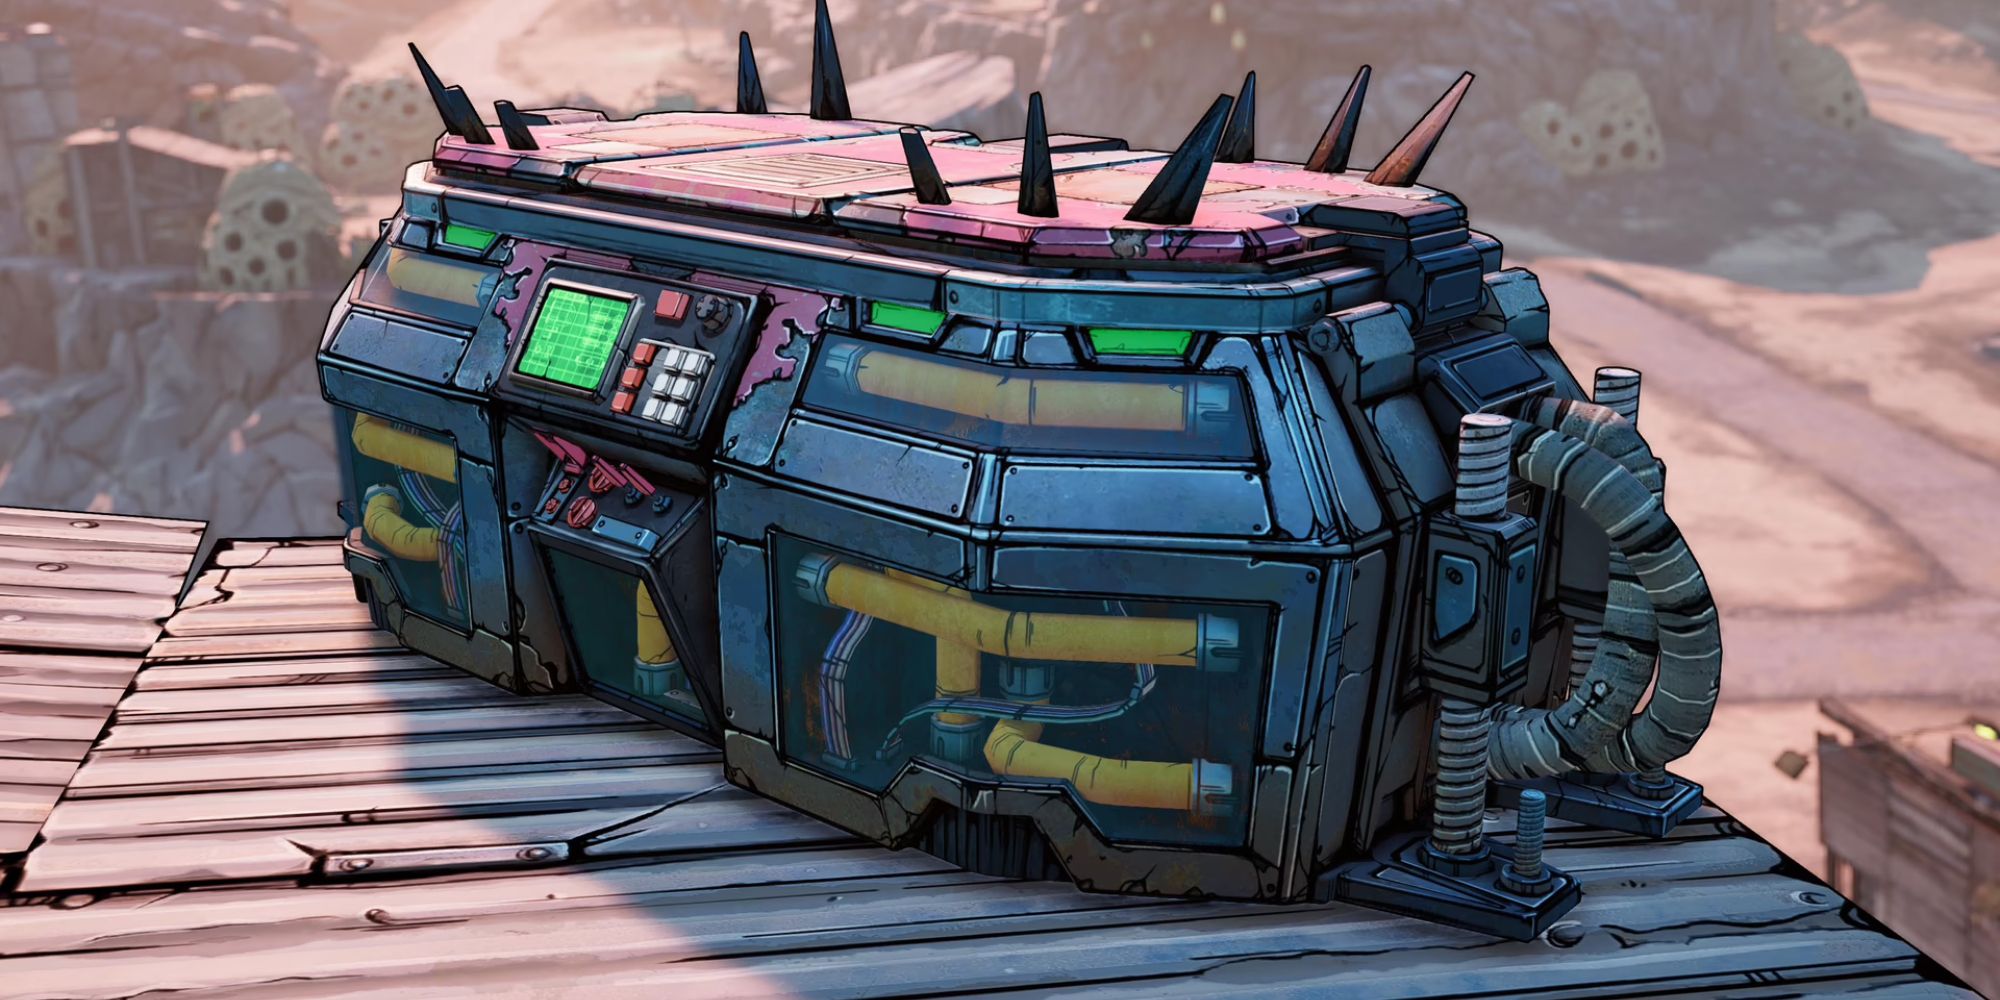 How to open locked chests in Borderlands 3